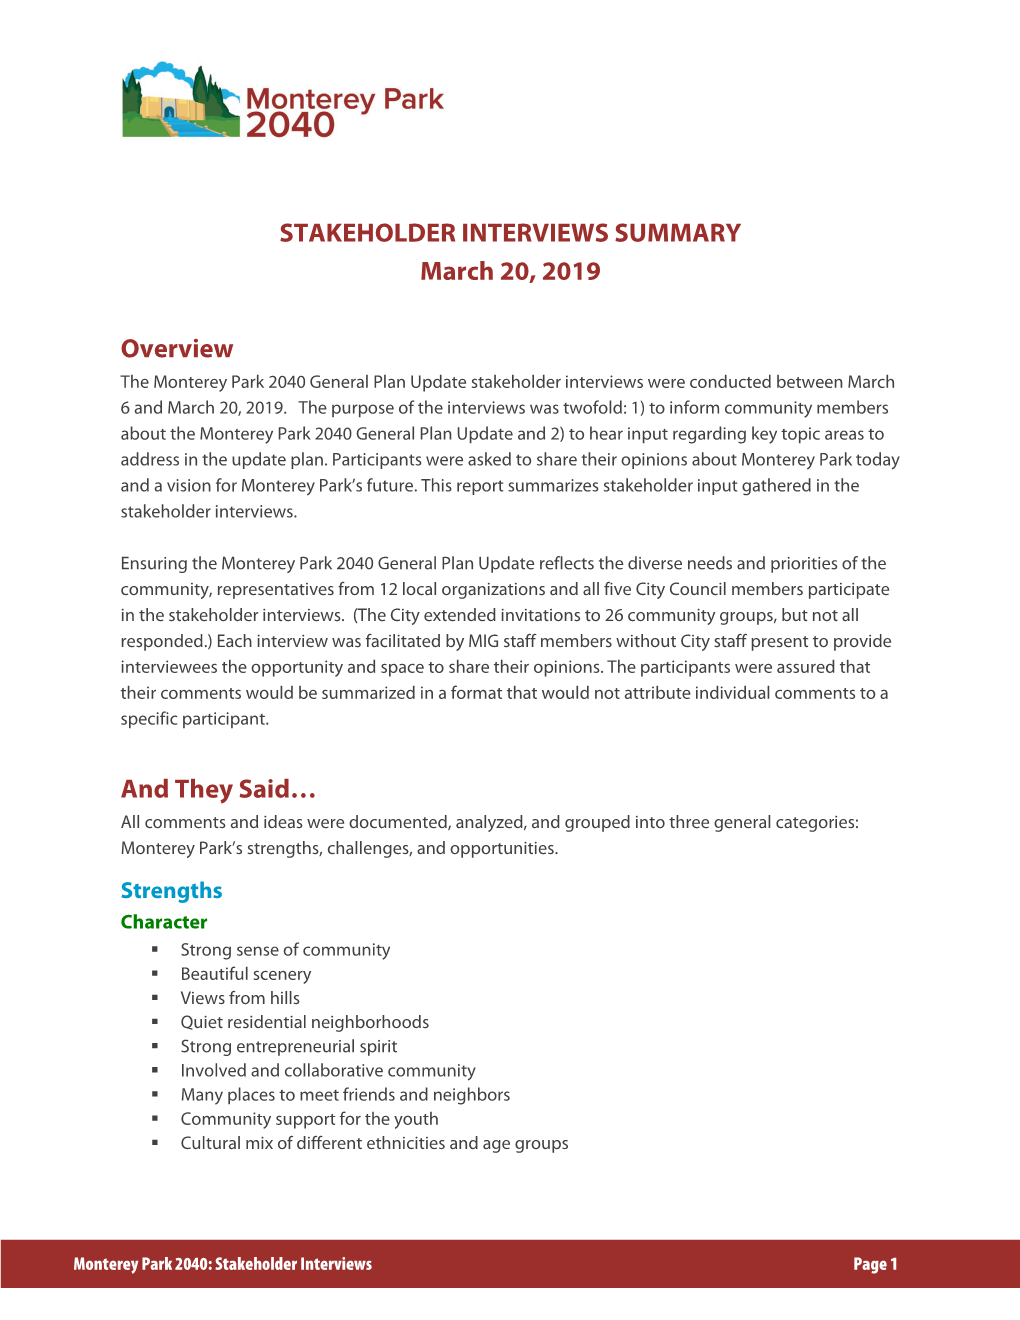 Stakeholders Interview Summary Sheet